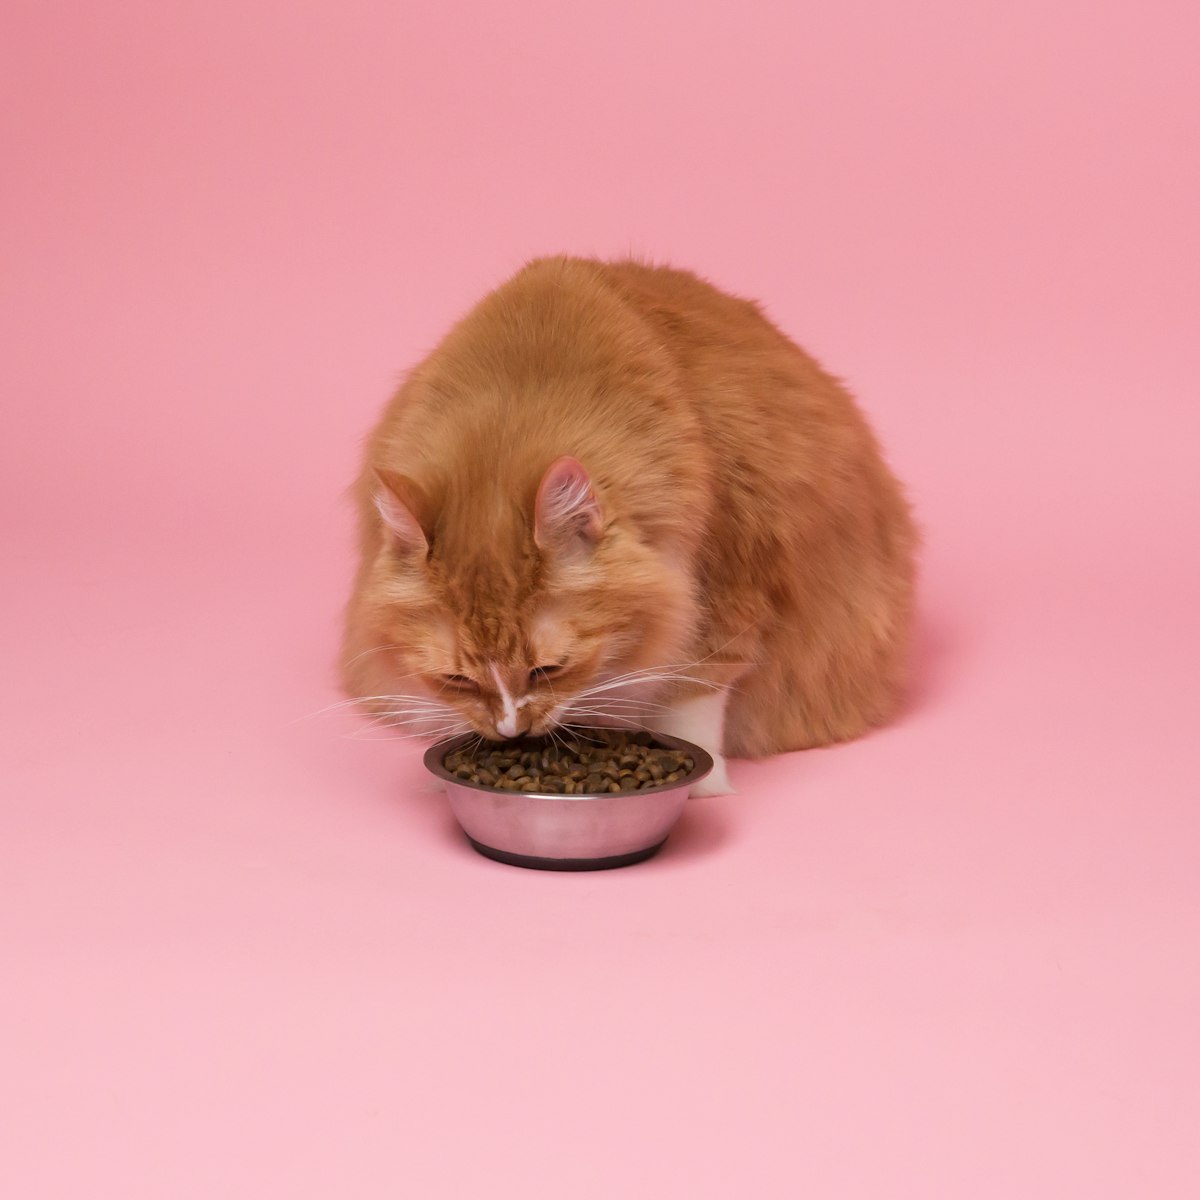 What food is right for your cat